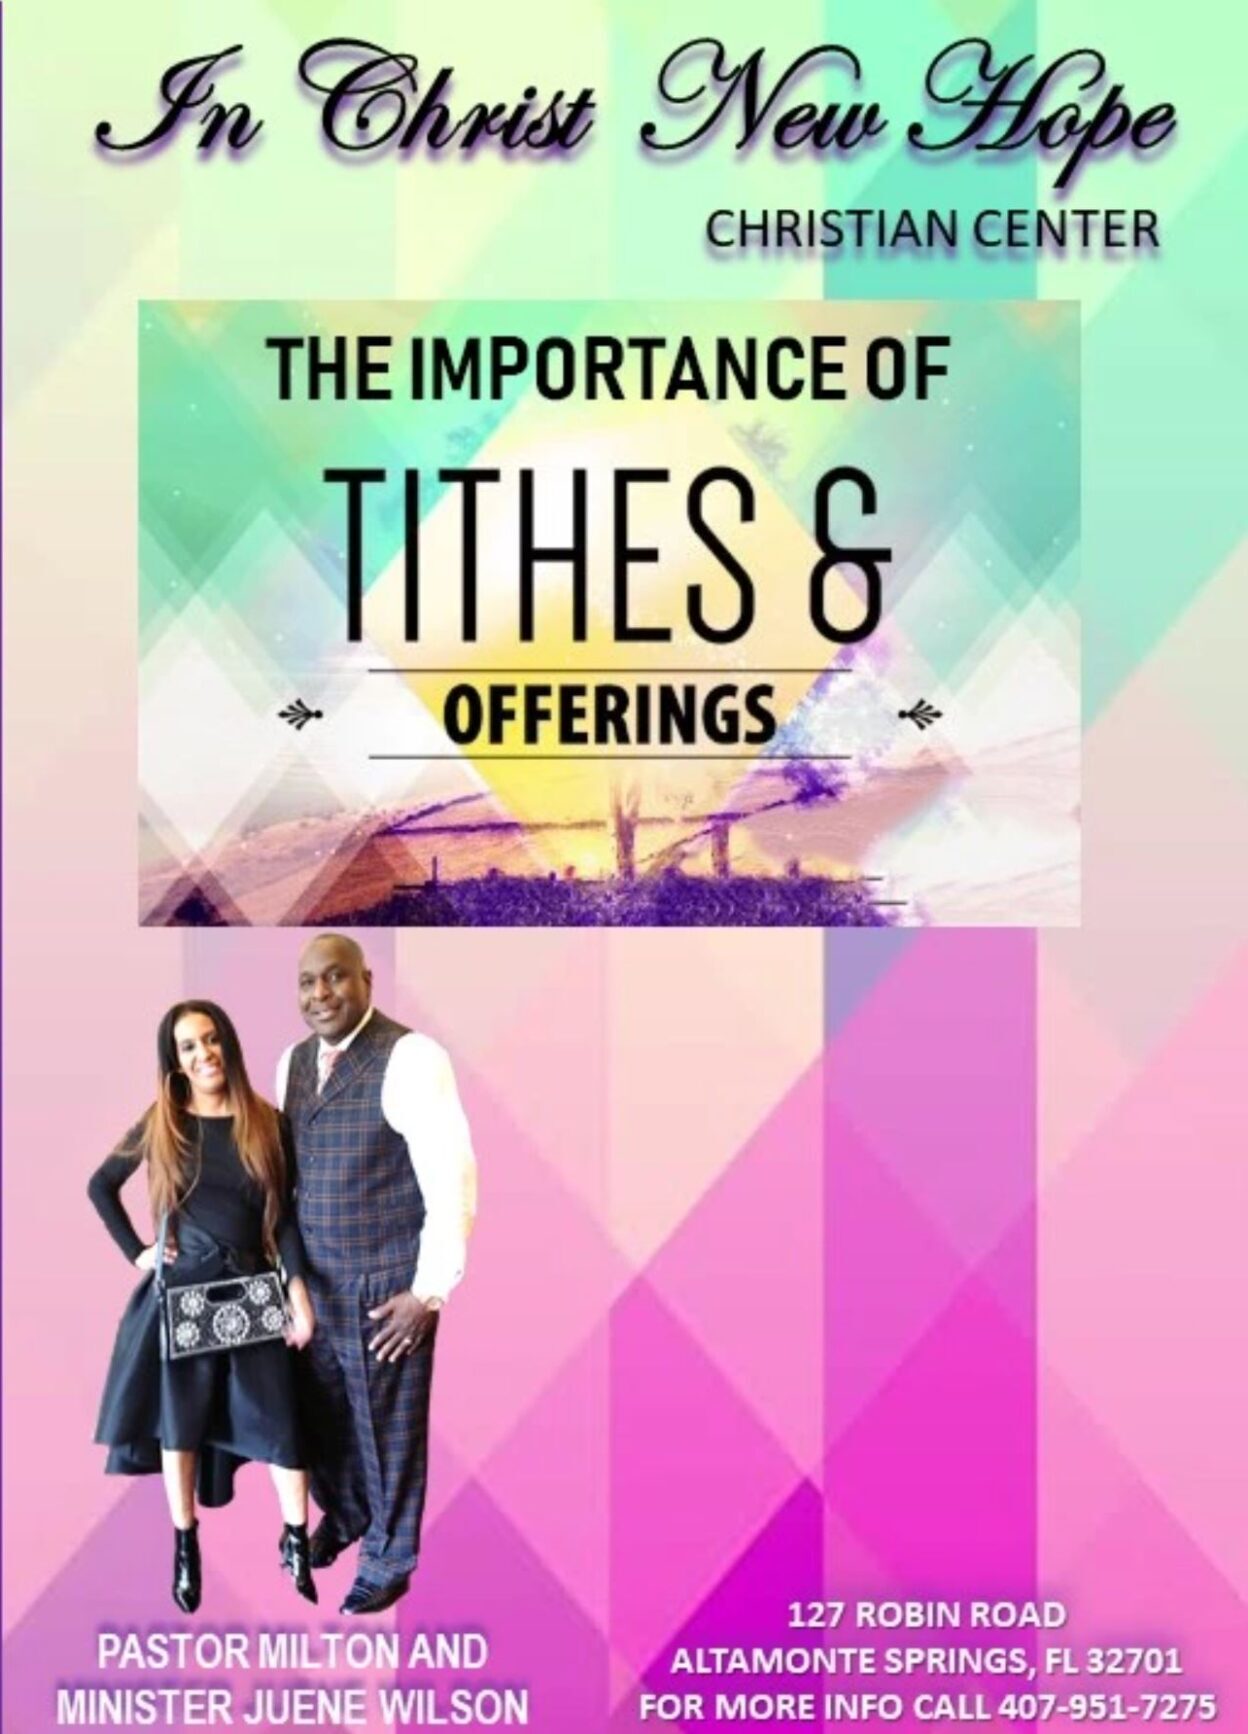 The Importance of Tithes and Offering In Christ New Hope Christian Center